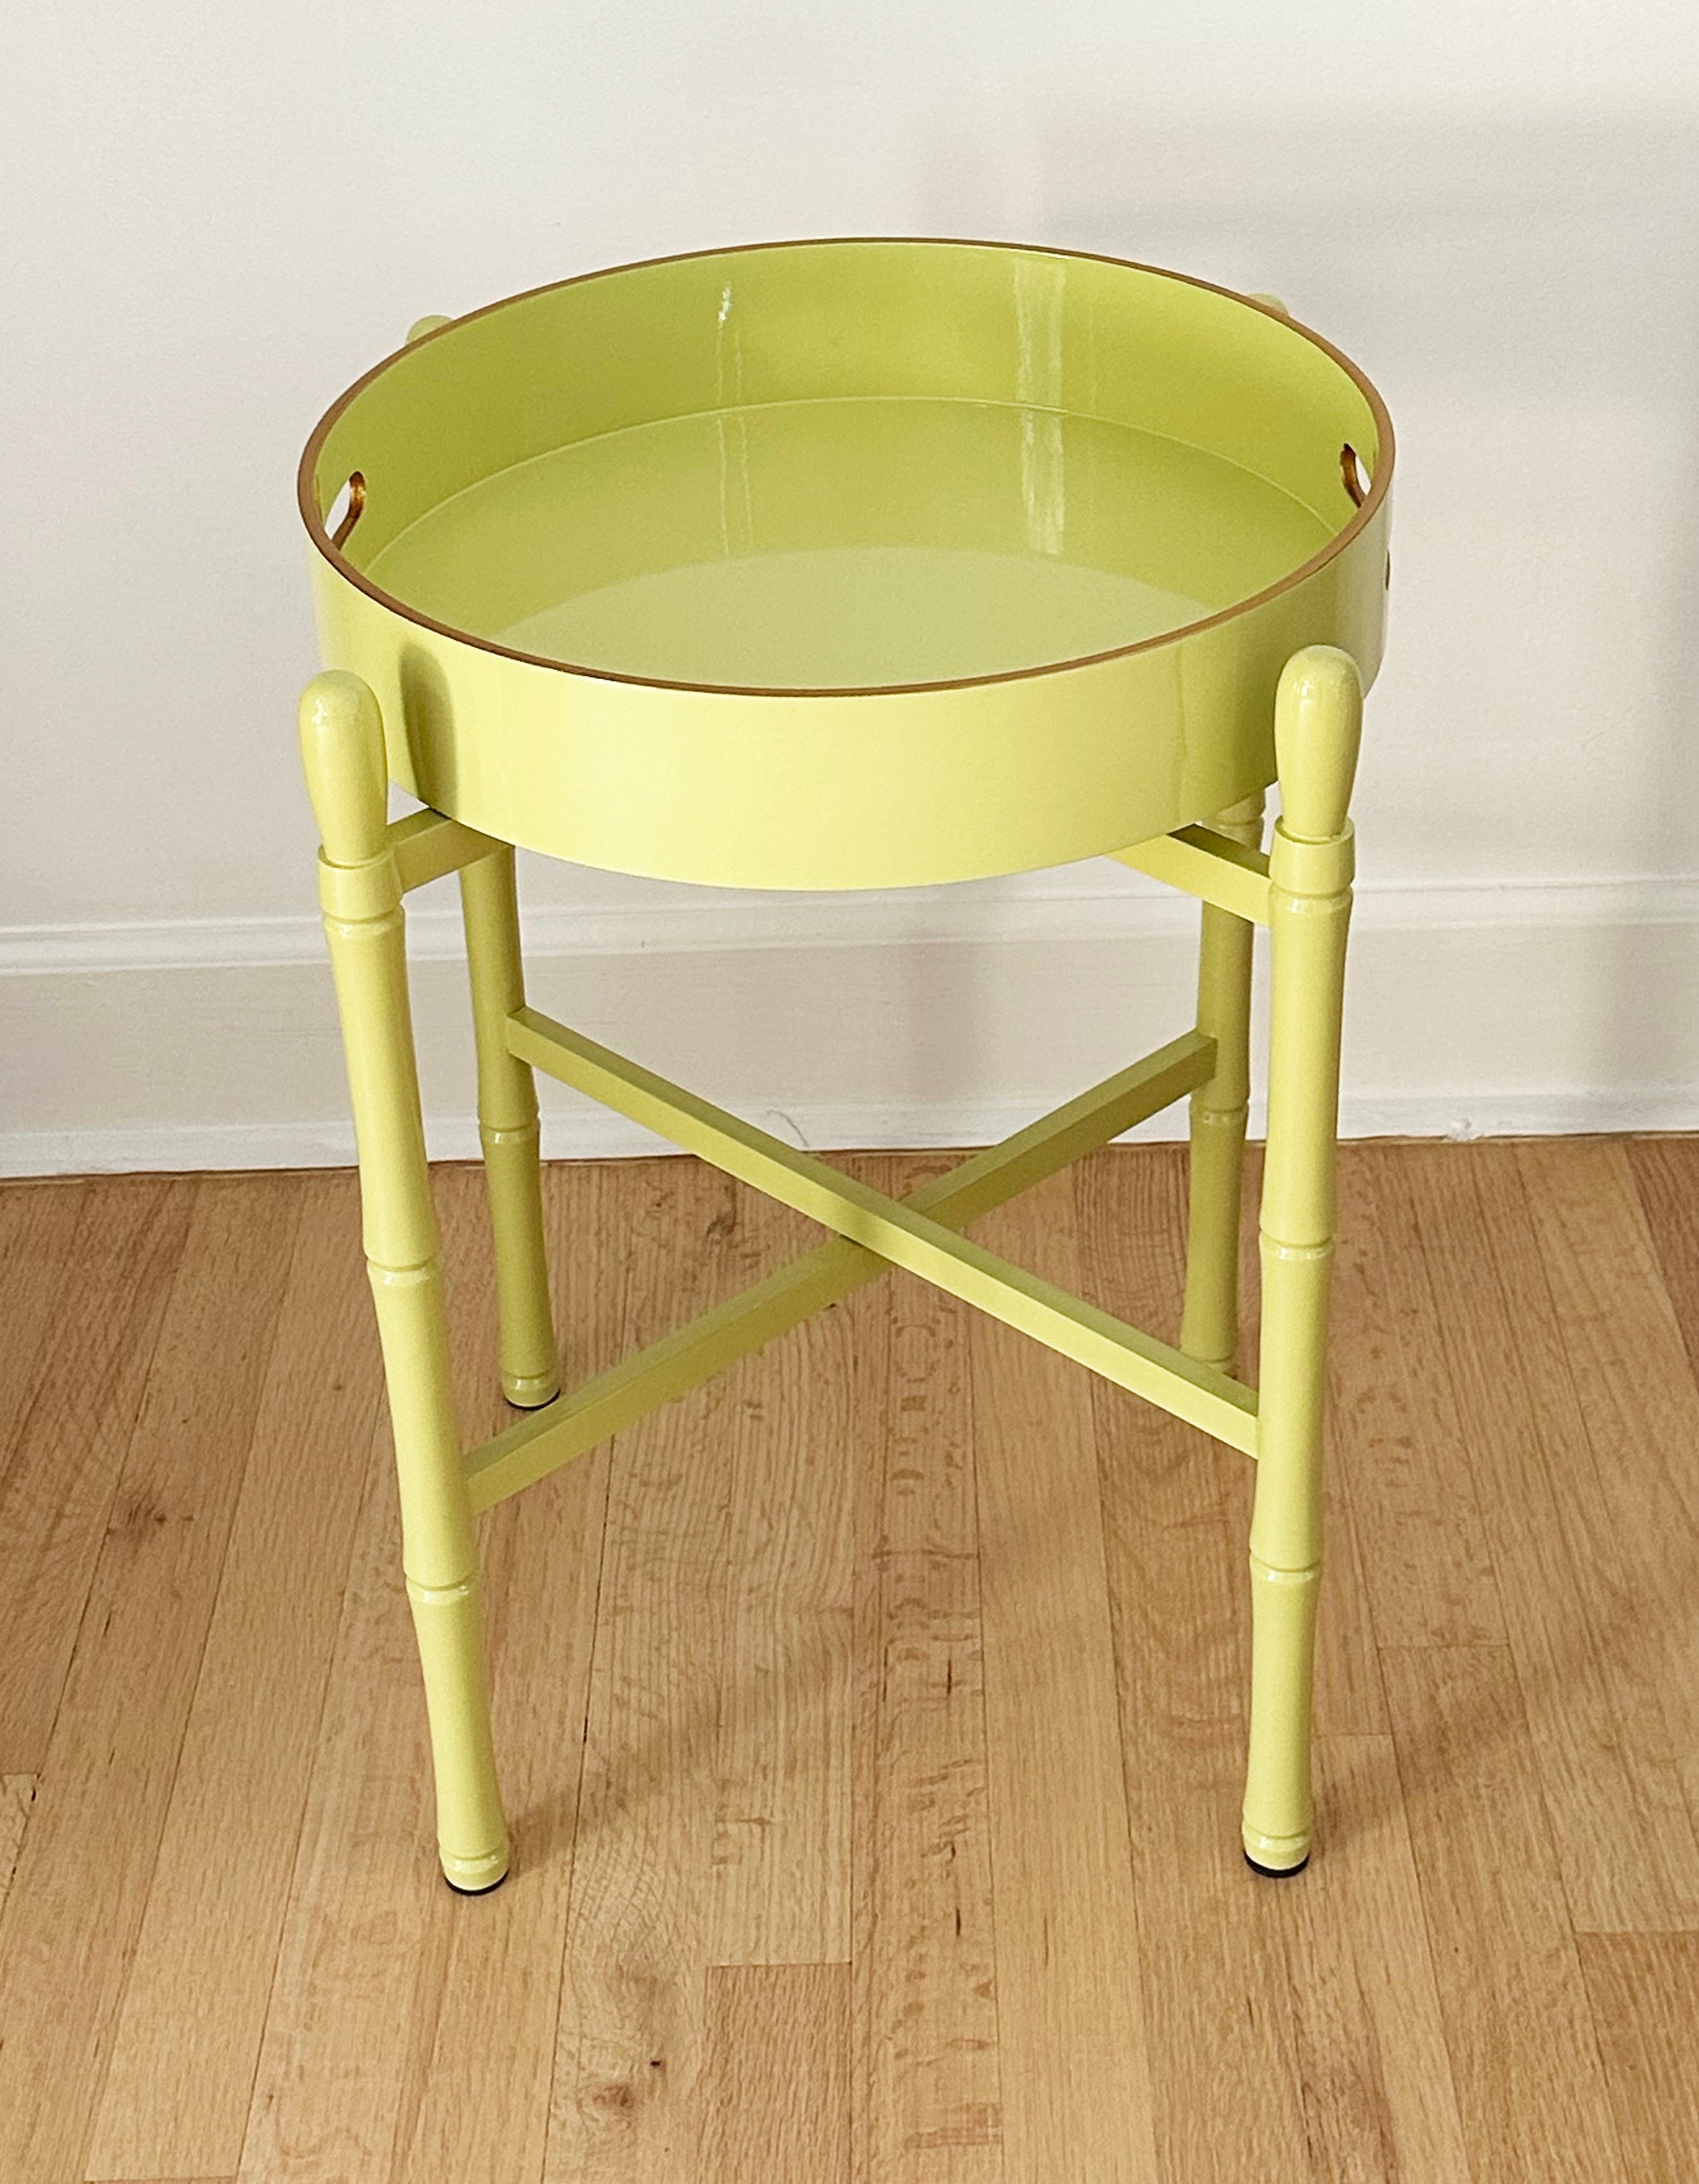 ROUND LACQUER TRAY TABLE LIME